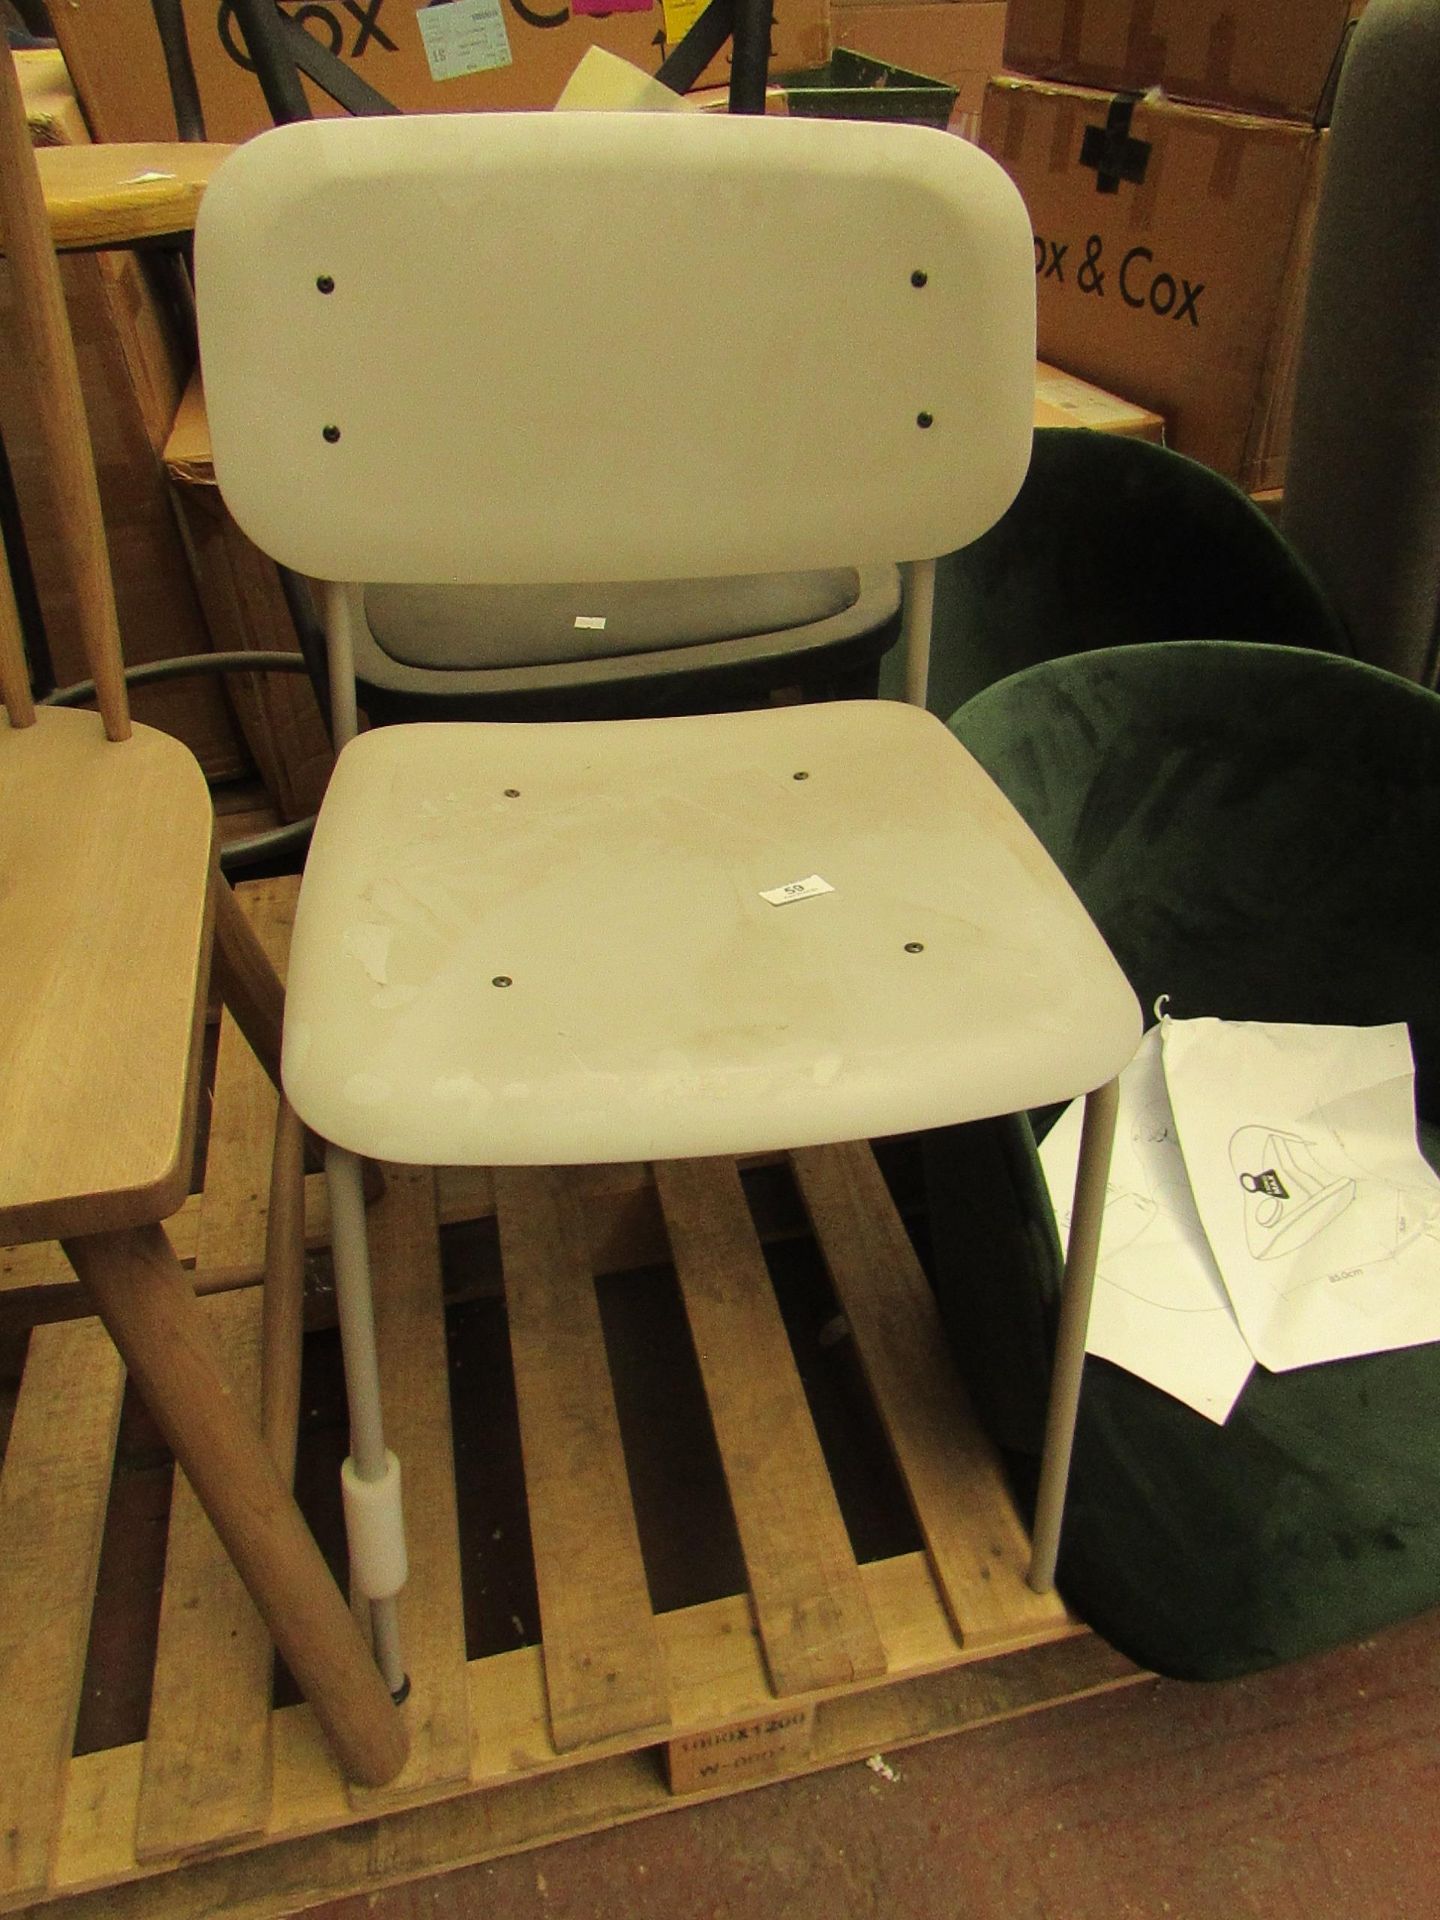 | 1X | MADE.COM METAL DINING CHAIR - UNCHECKED & NEEDS A CLEAN | RRP £- |